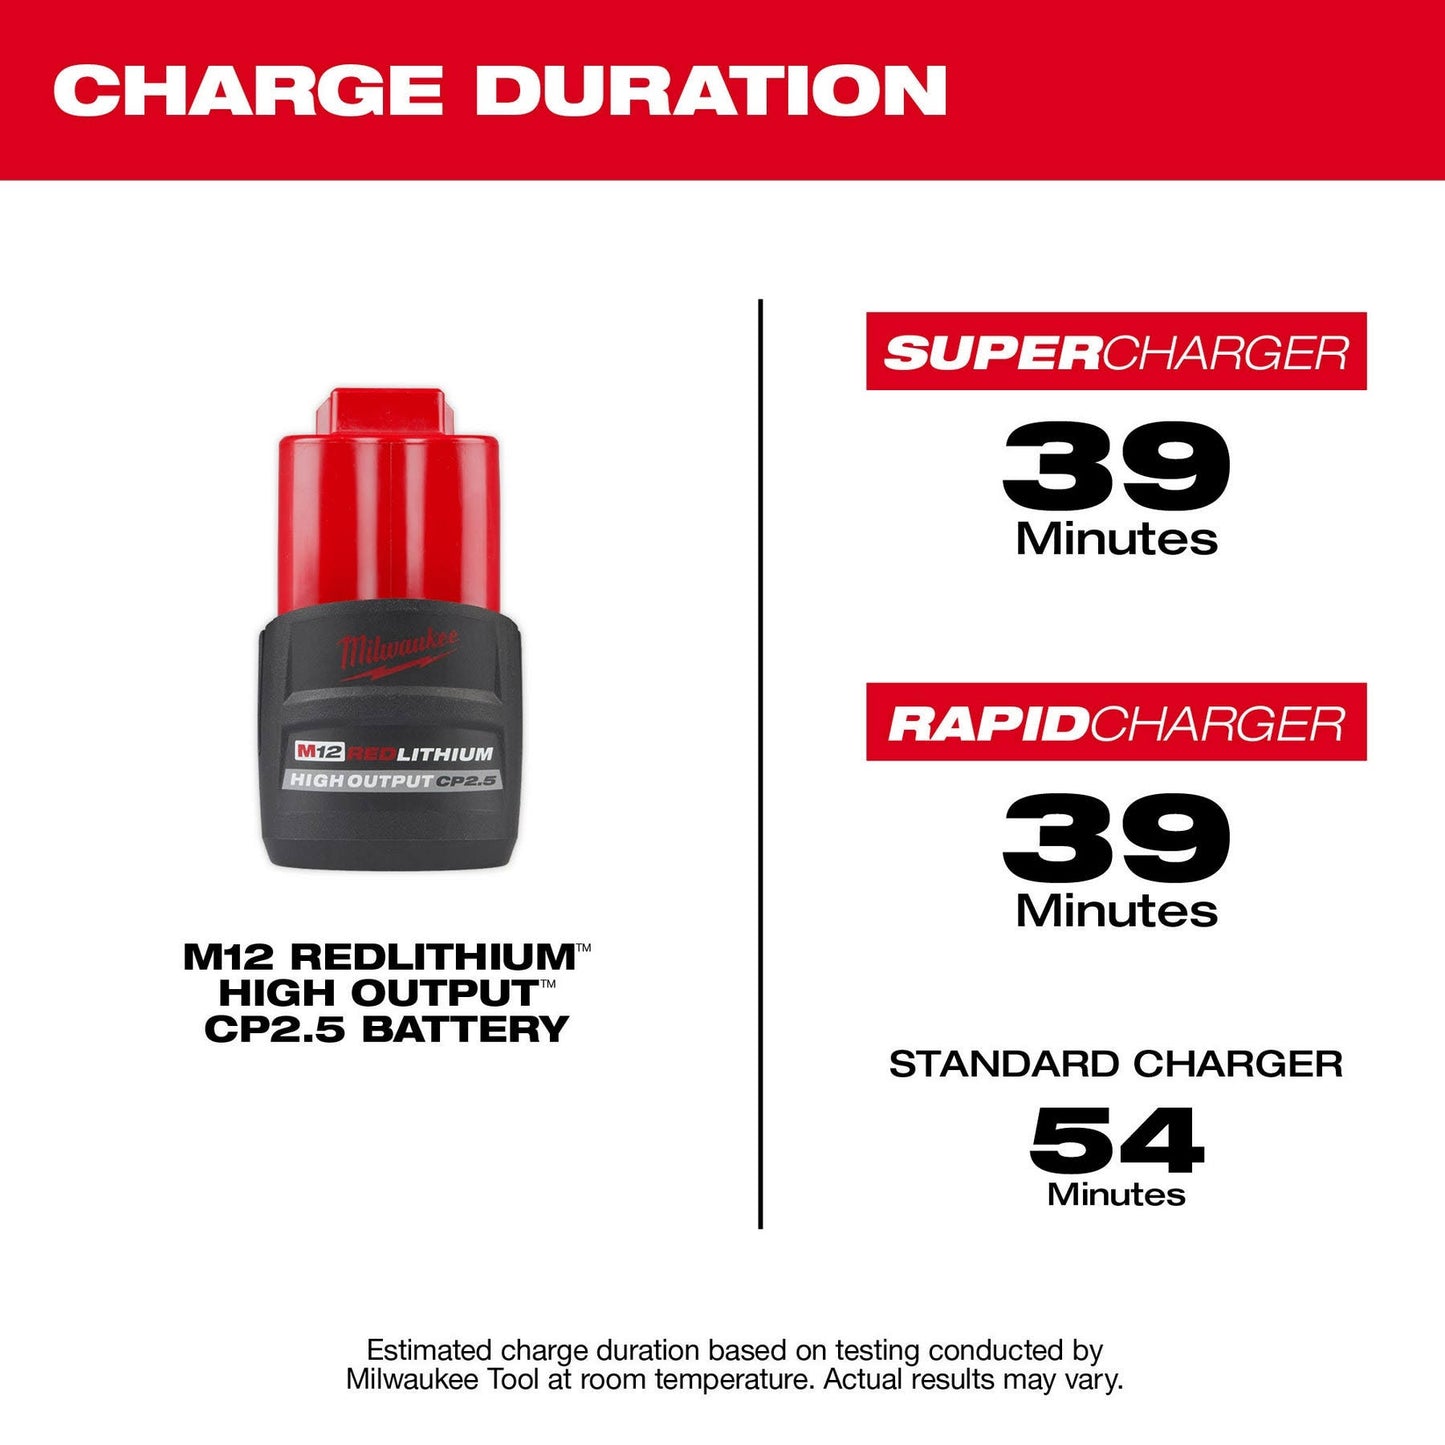 Milwaukee M12 REDLITHIUM High OUTPUT CP2.5 Battery Pack 48-11-2425